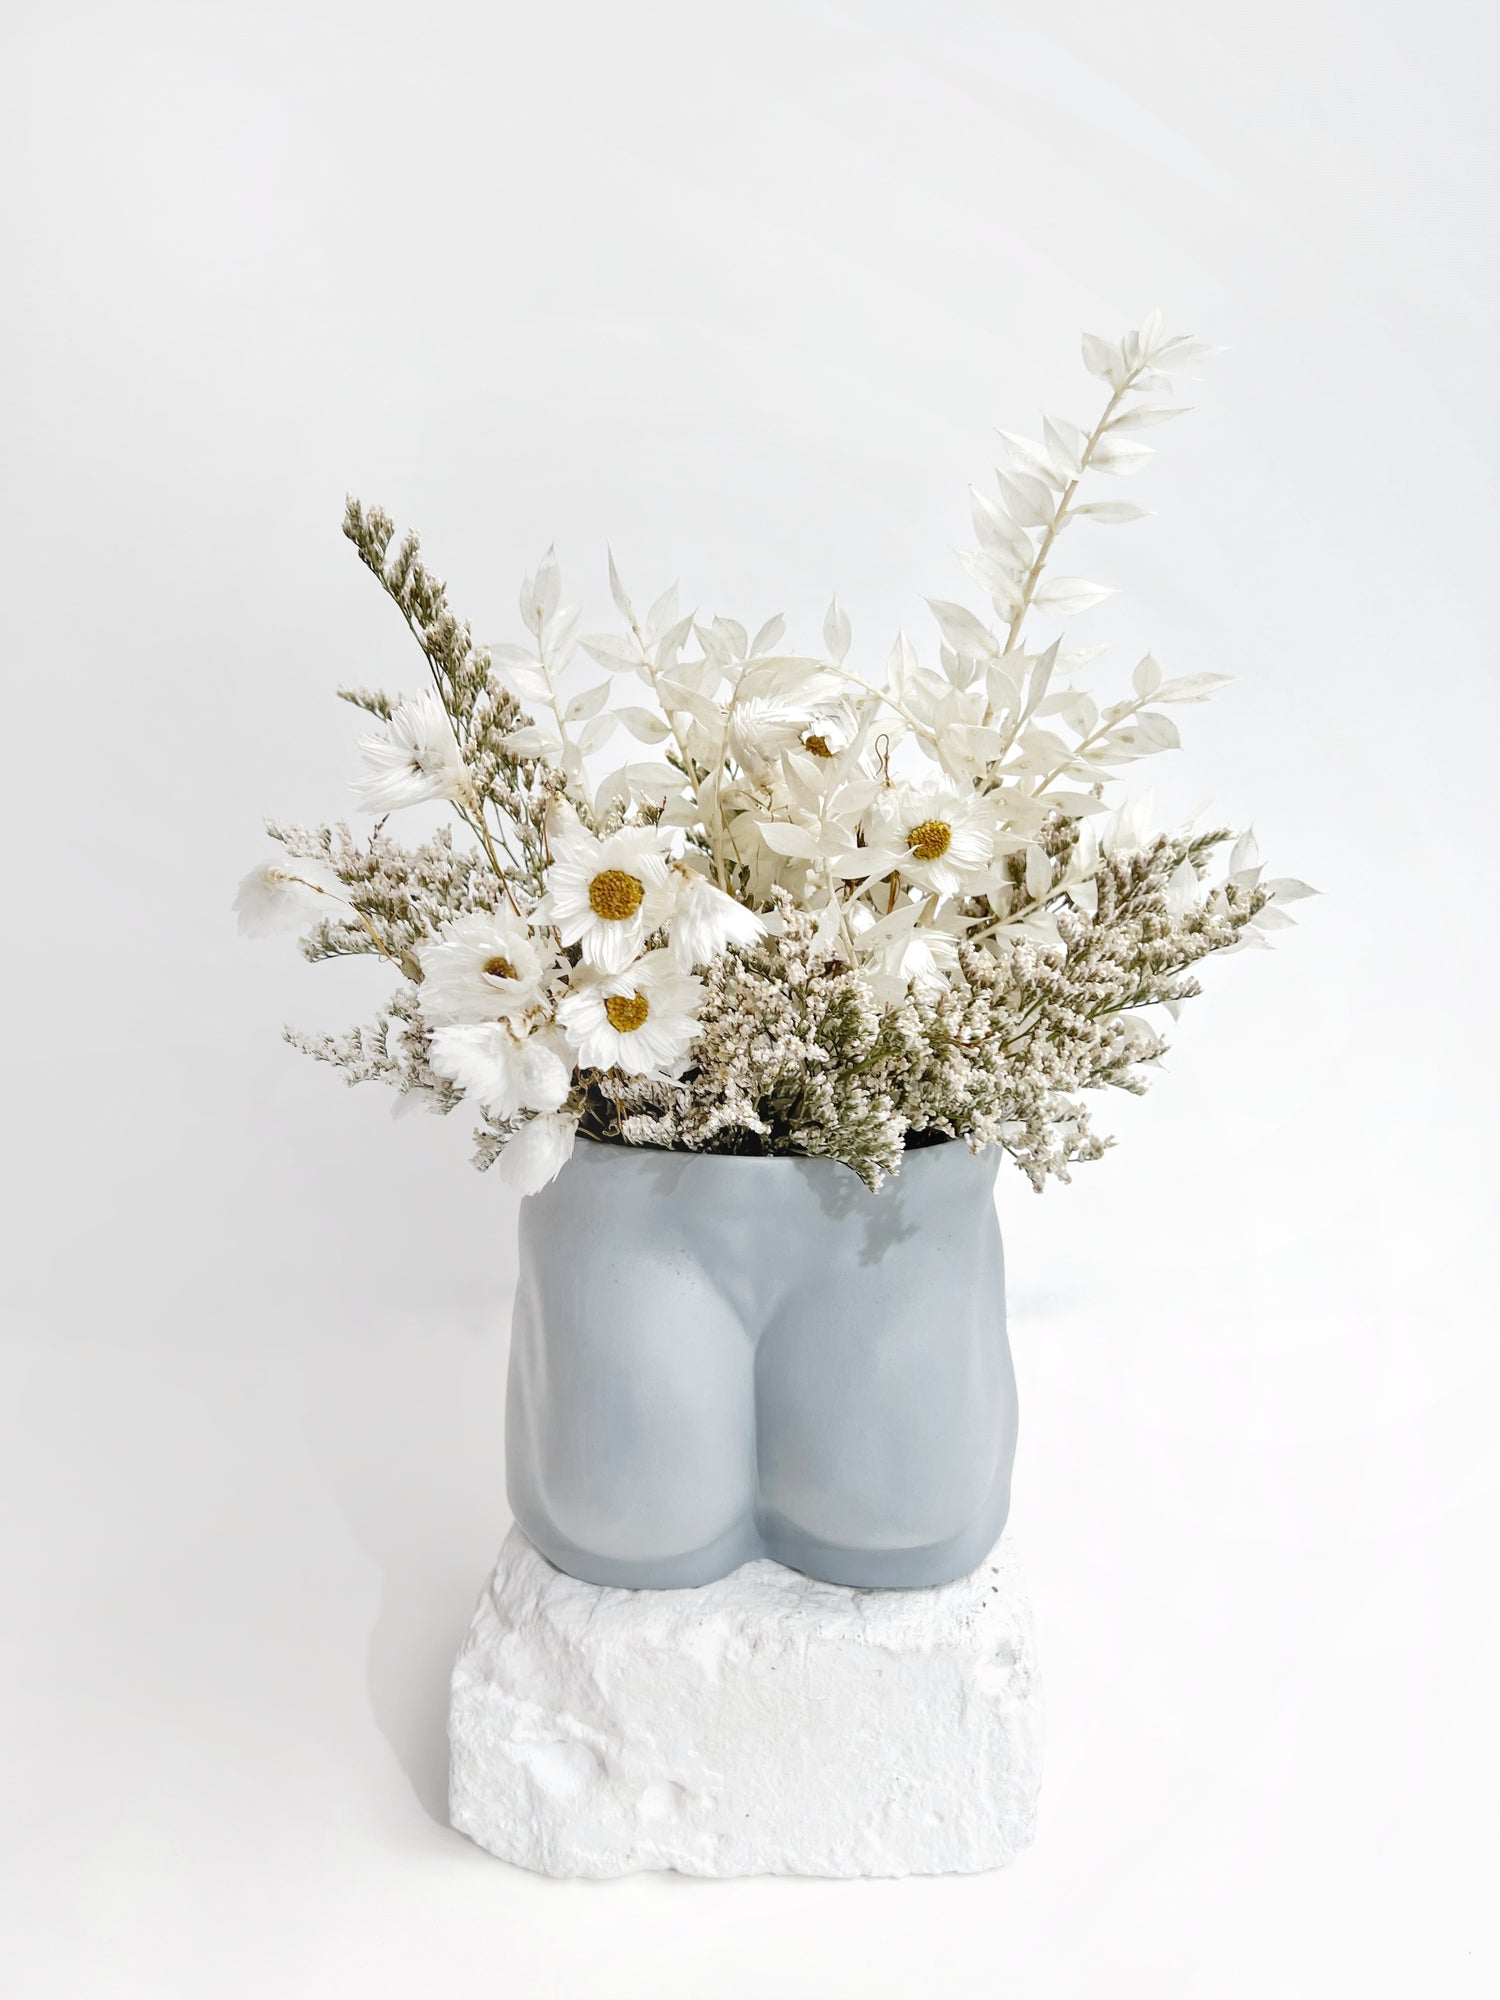 An everlasting flower arrangement in white dainty dried and preserved florals in our soft blue tush vase from Jones and Co, handmade fine porcelain.